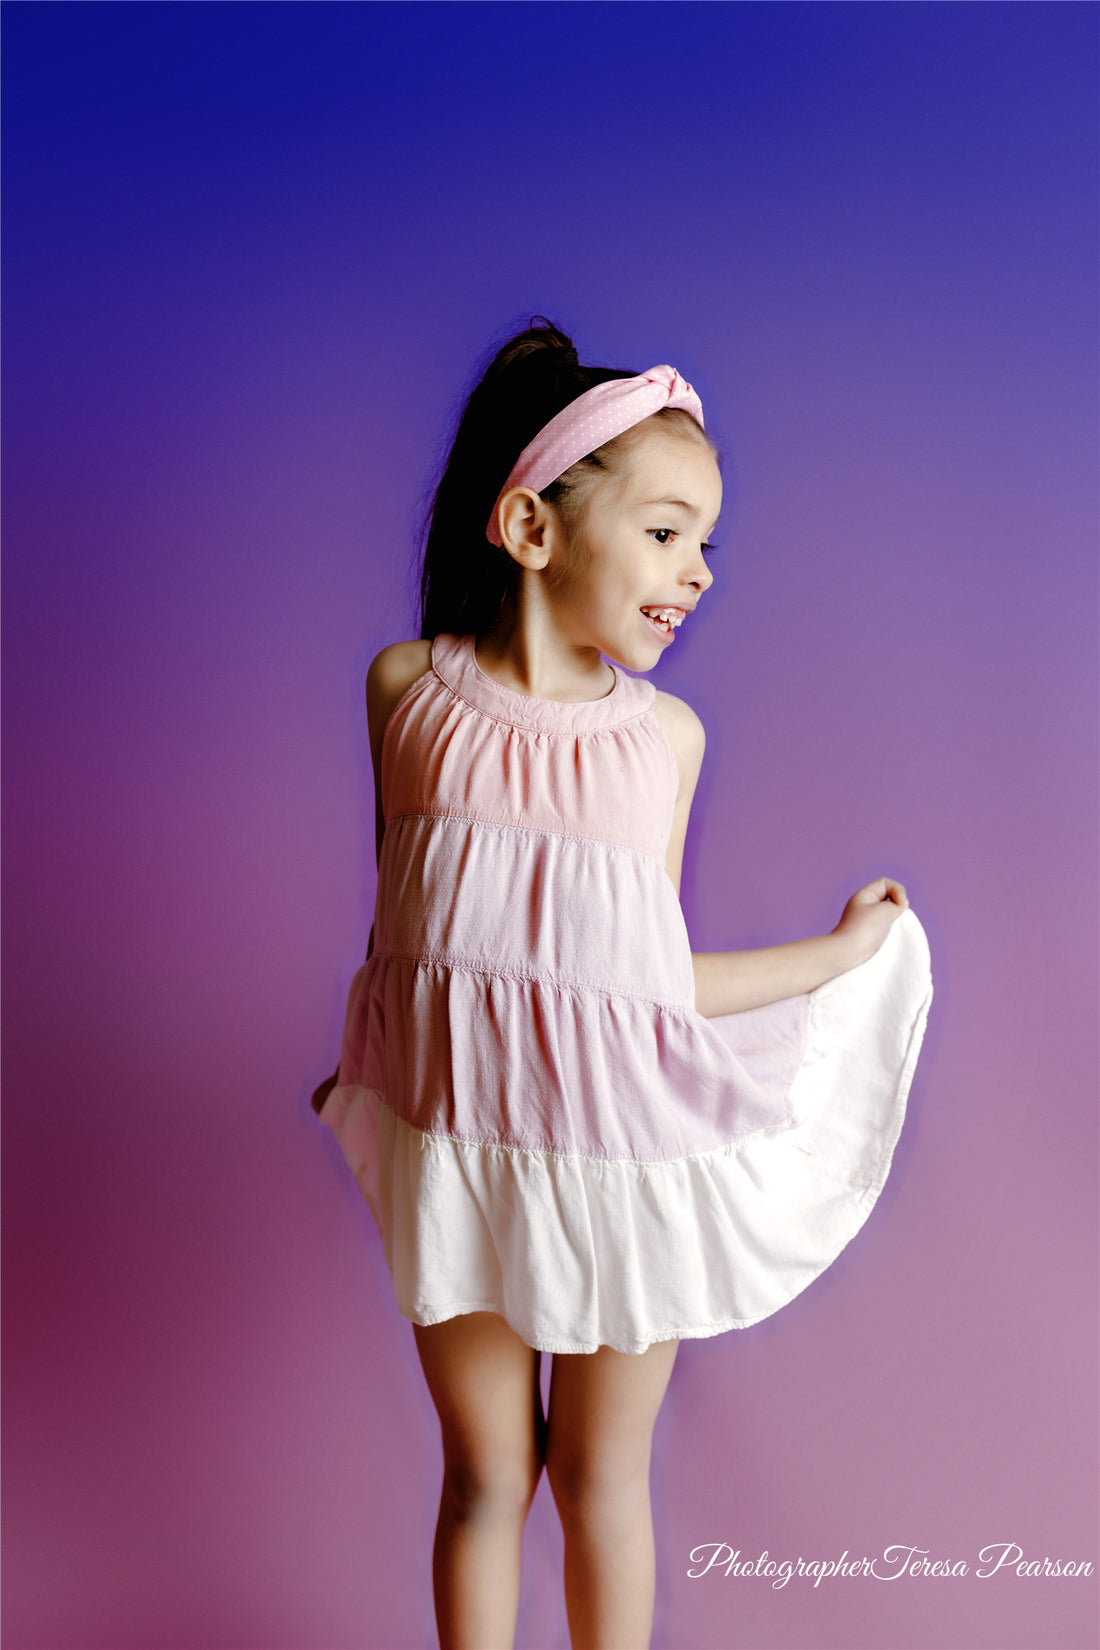 Avezano Bluish Violet Fades To Pink Gradient Backdrop For Portrait Photography